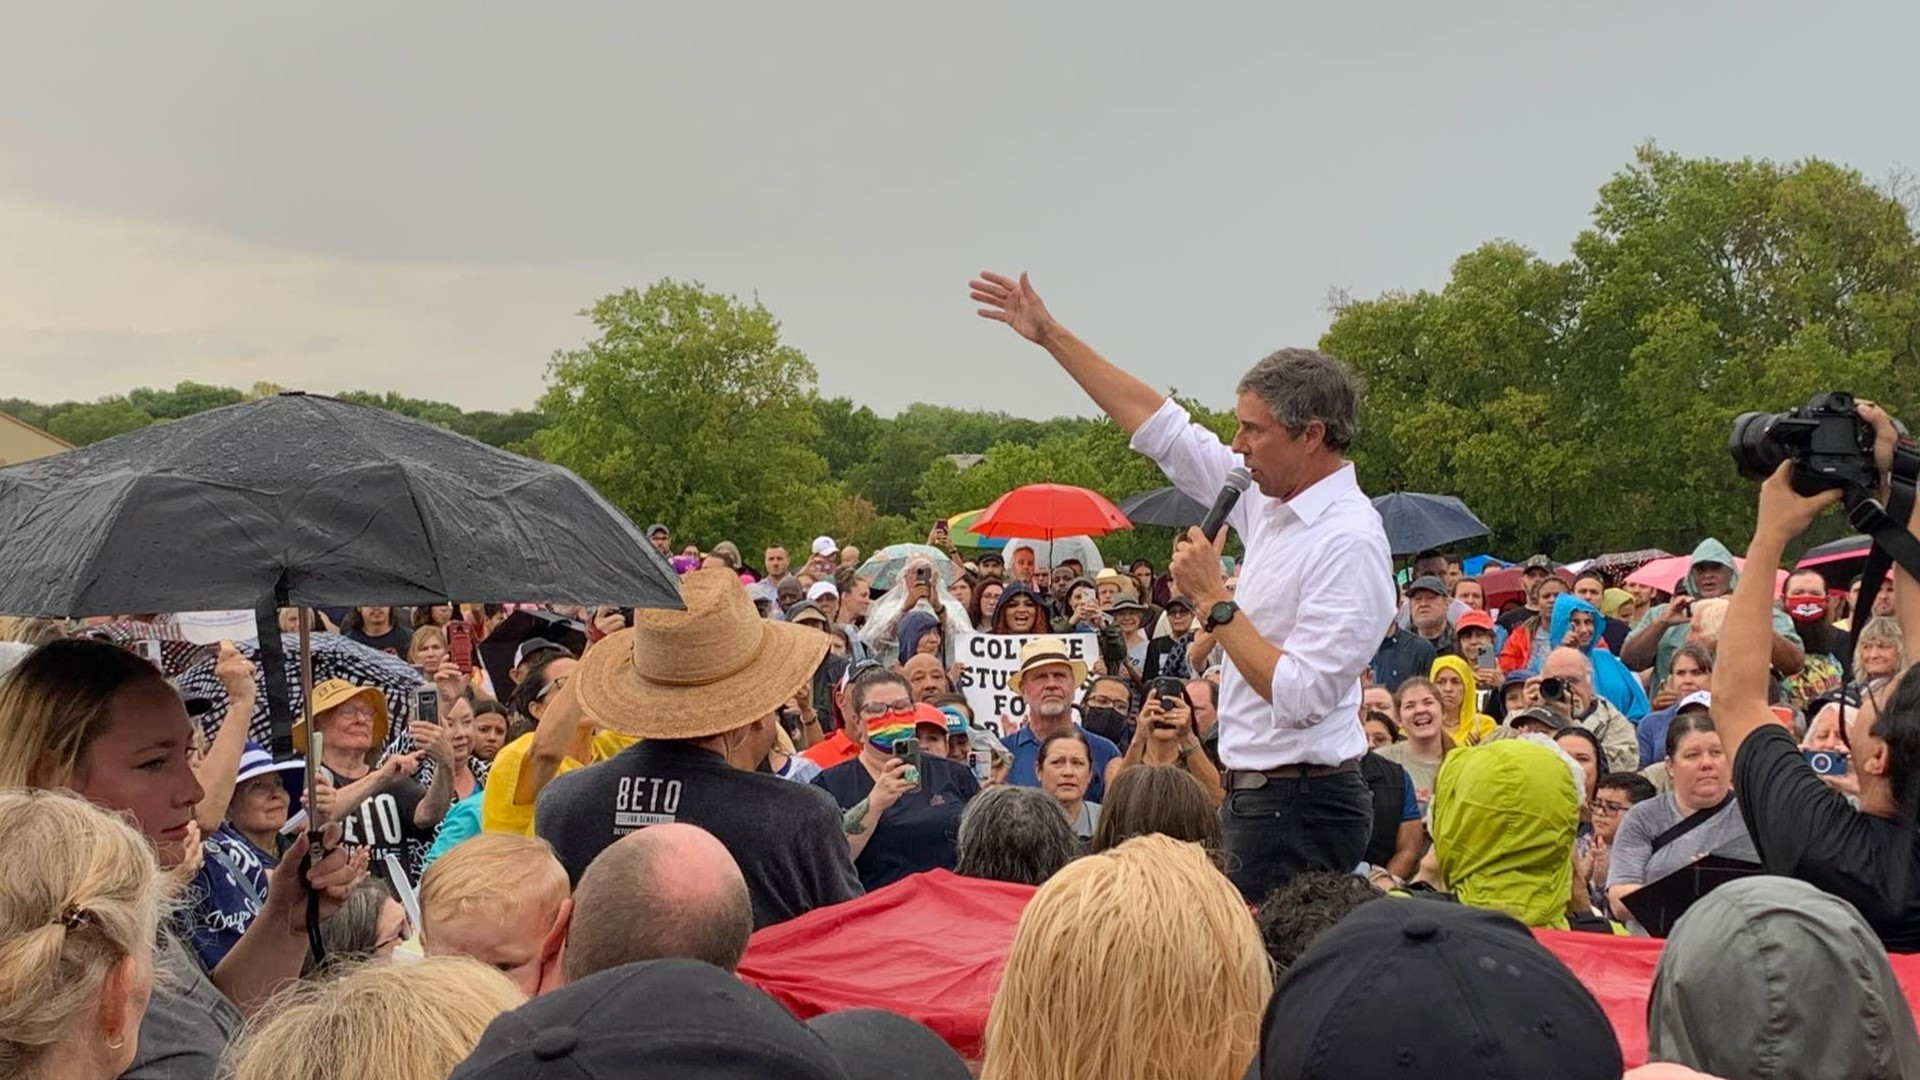 O'Rourke held a rally in Pflugerville on Thursday while Abbott was at a ribbon-cutting ceremony in Temple earlier this week.